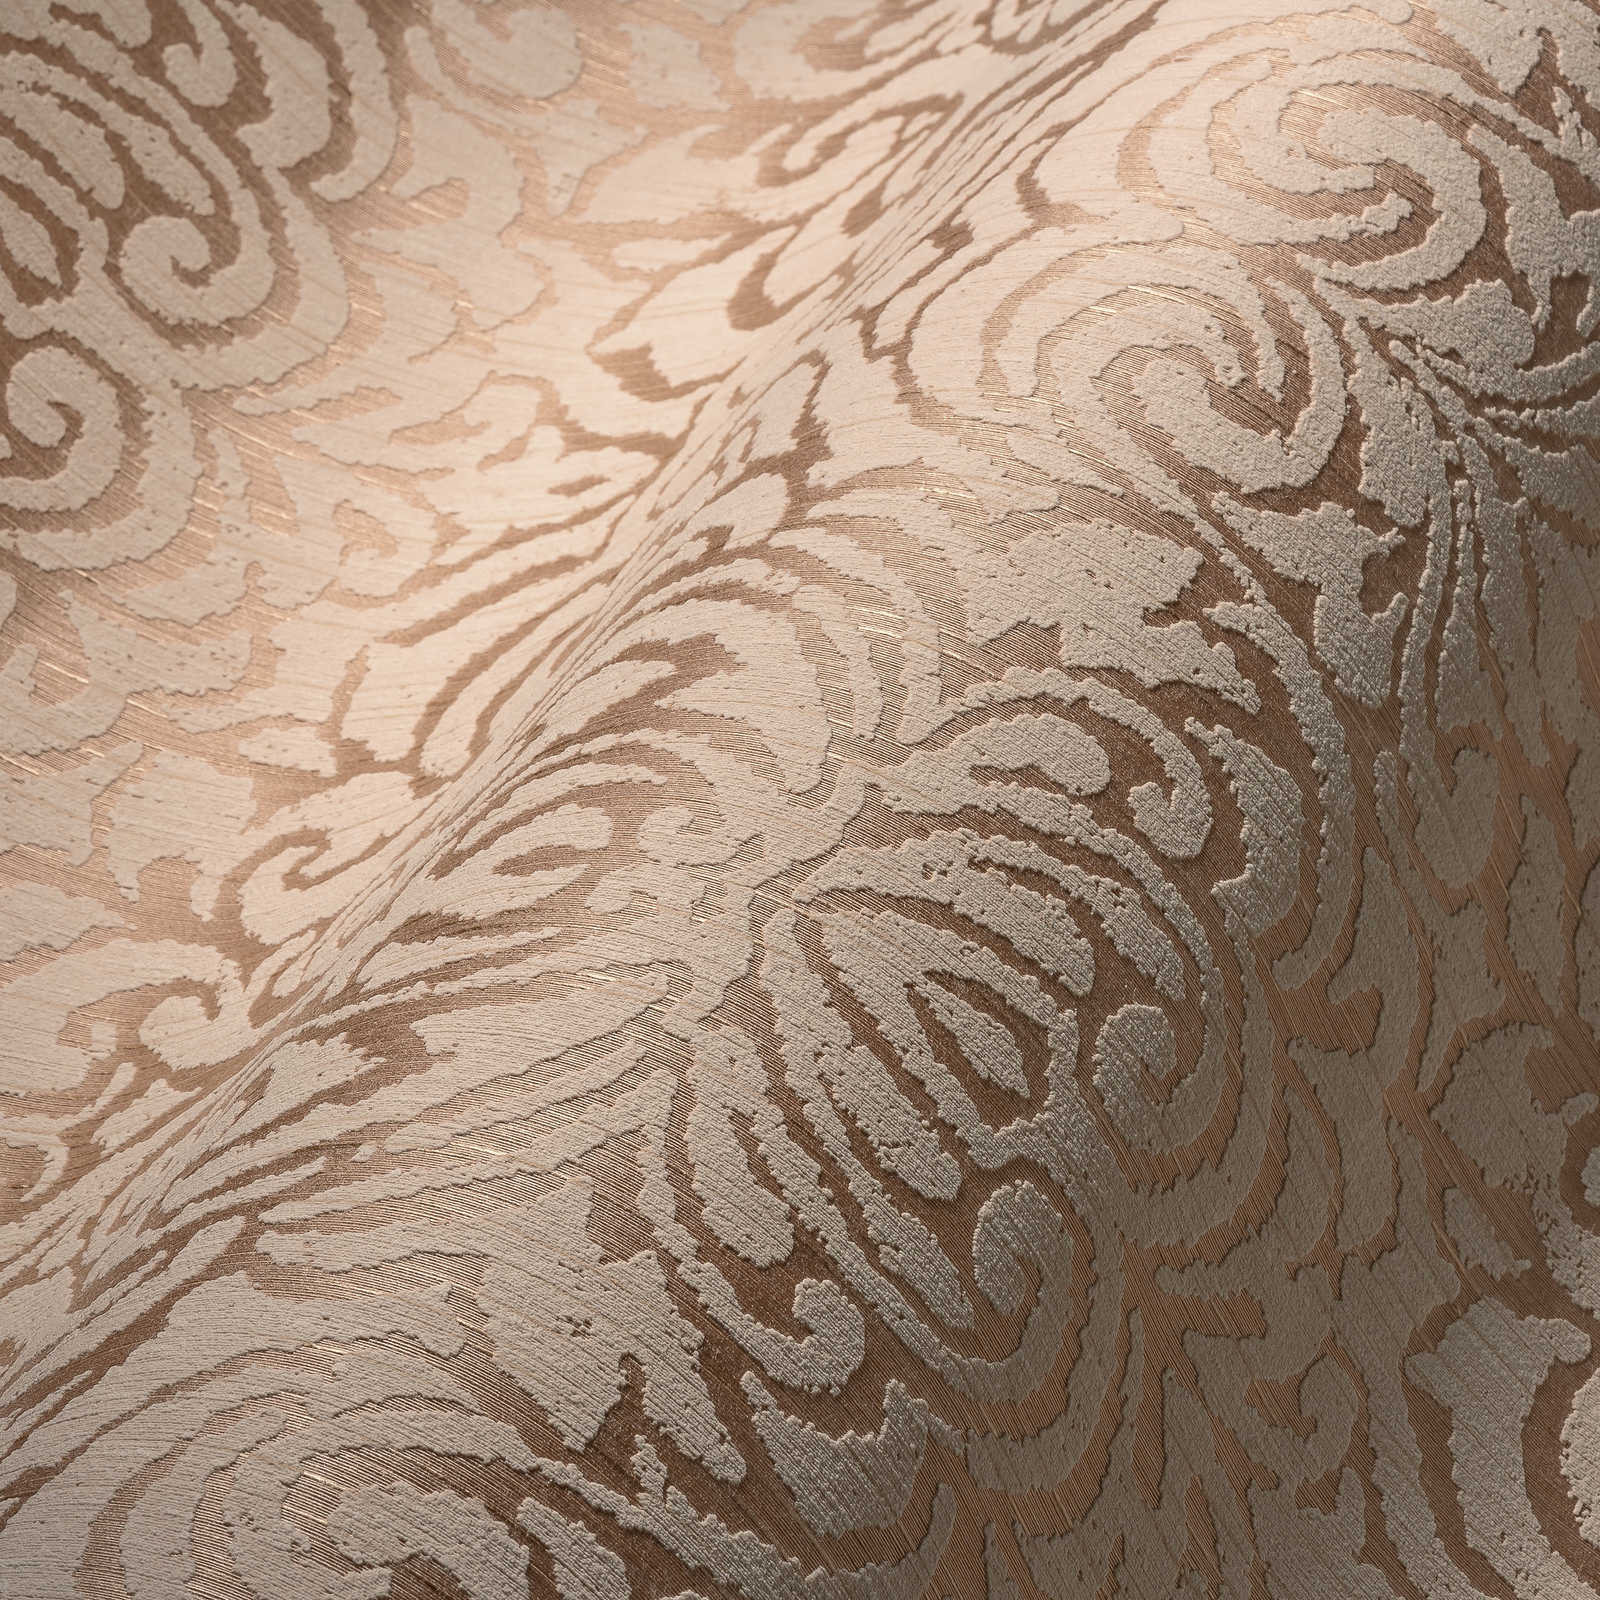             wallpaper ornaments used look with texture effect - beige
        